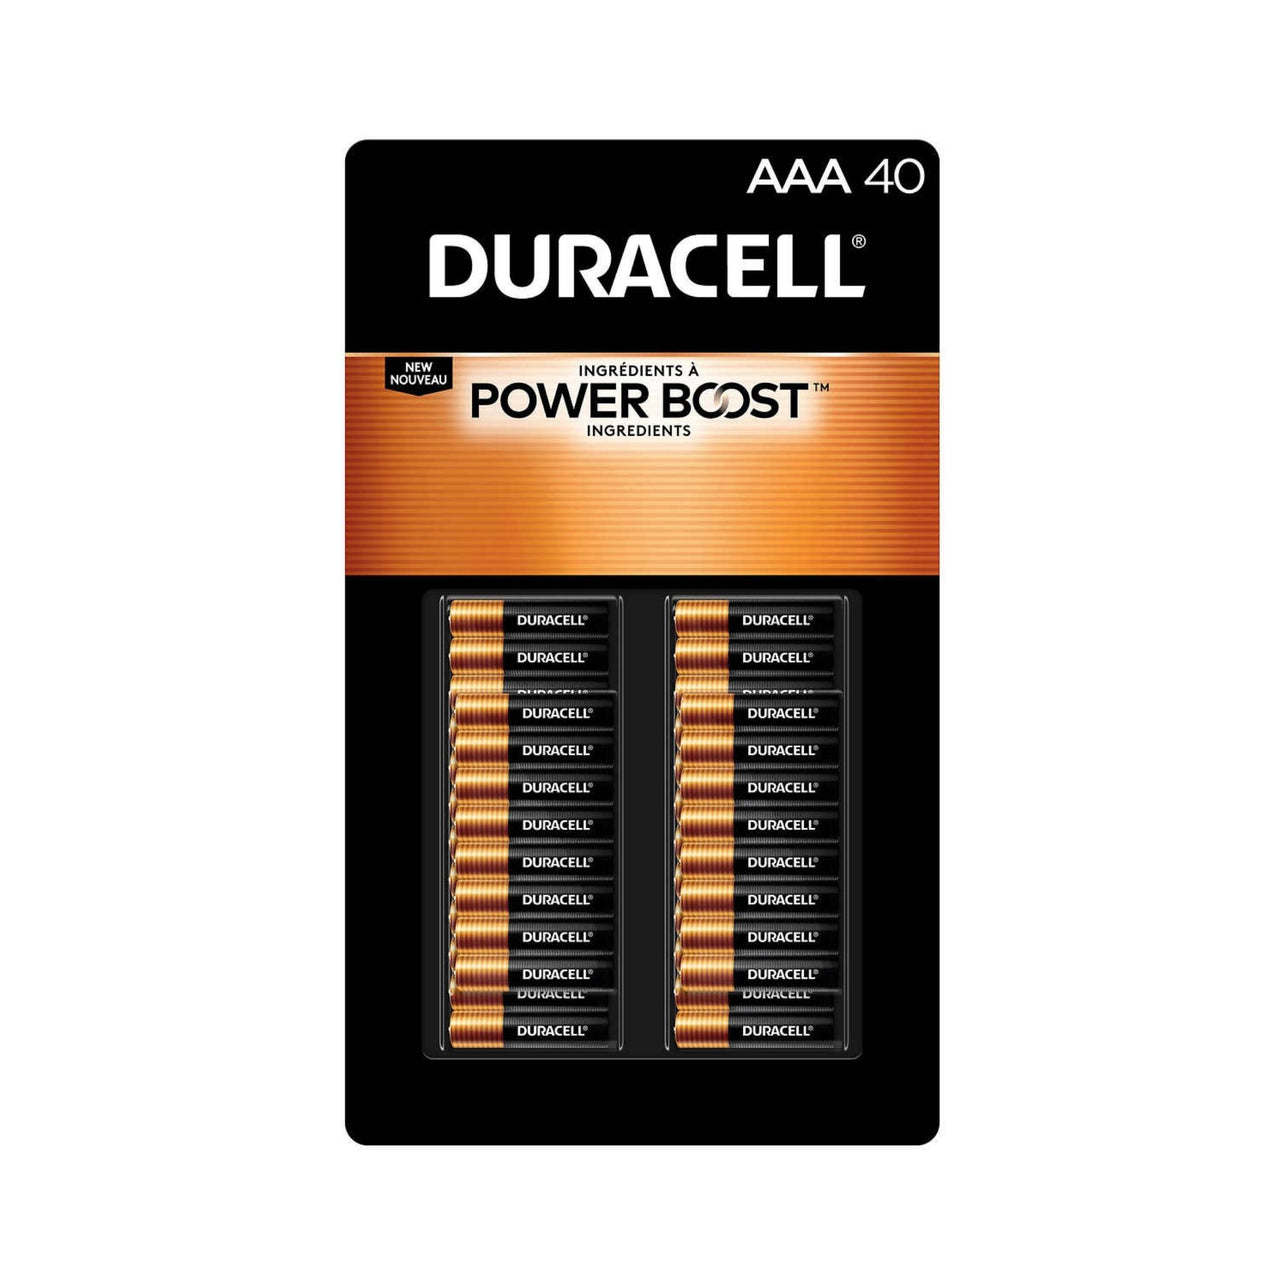 Image of Duracell CopperTop AAA Batteries with PowerBoost Ingredients, 30 count